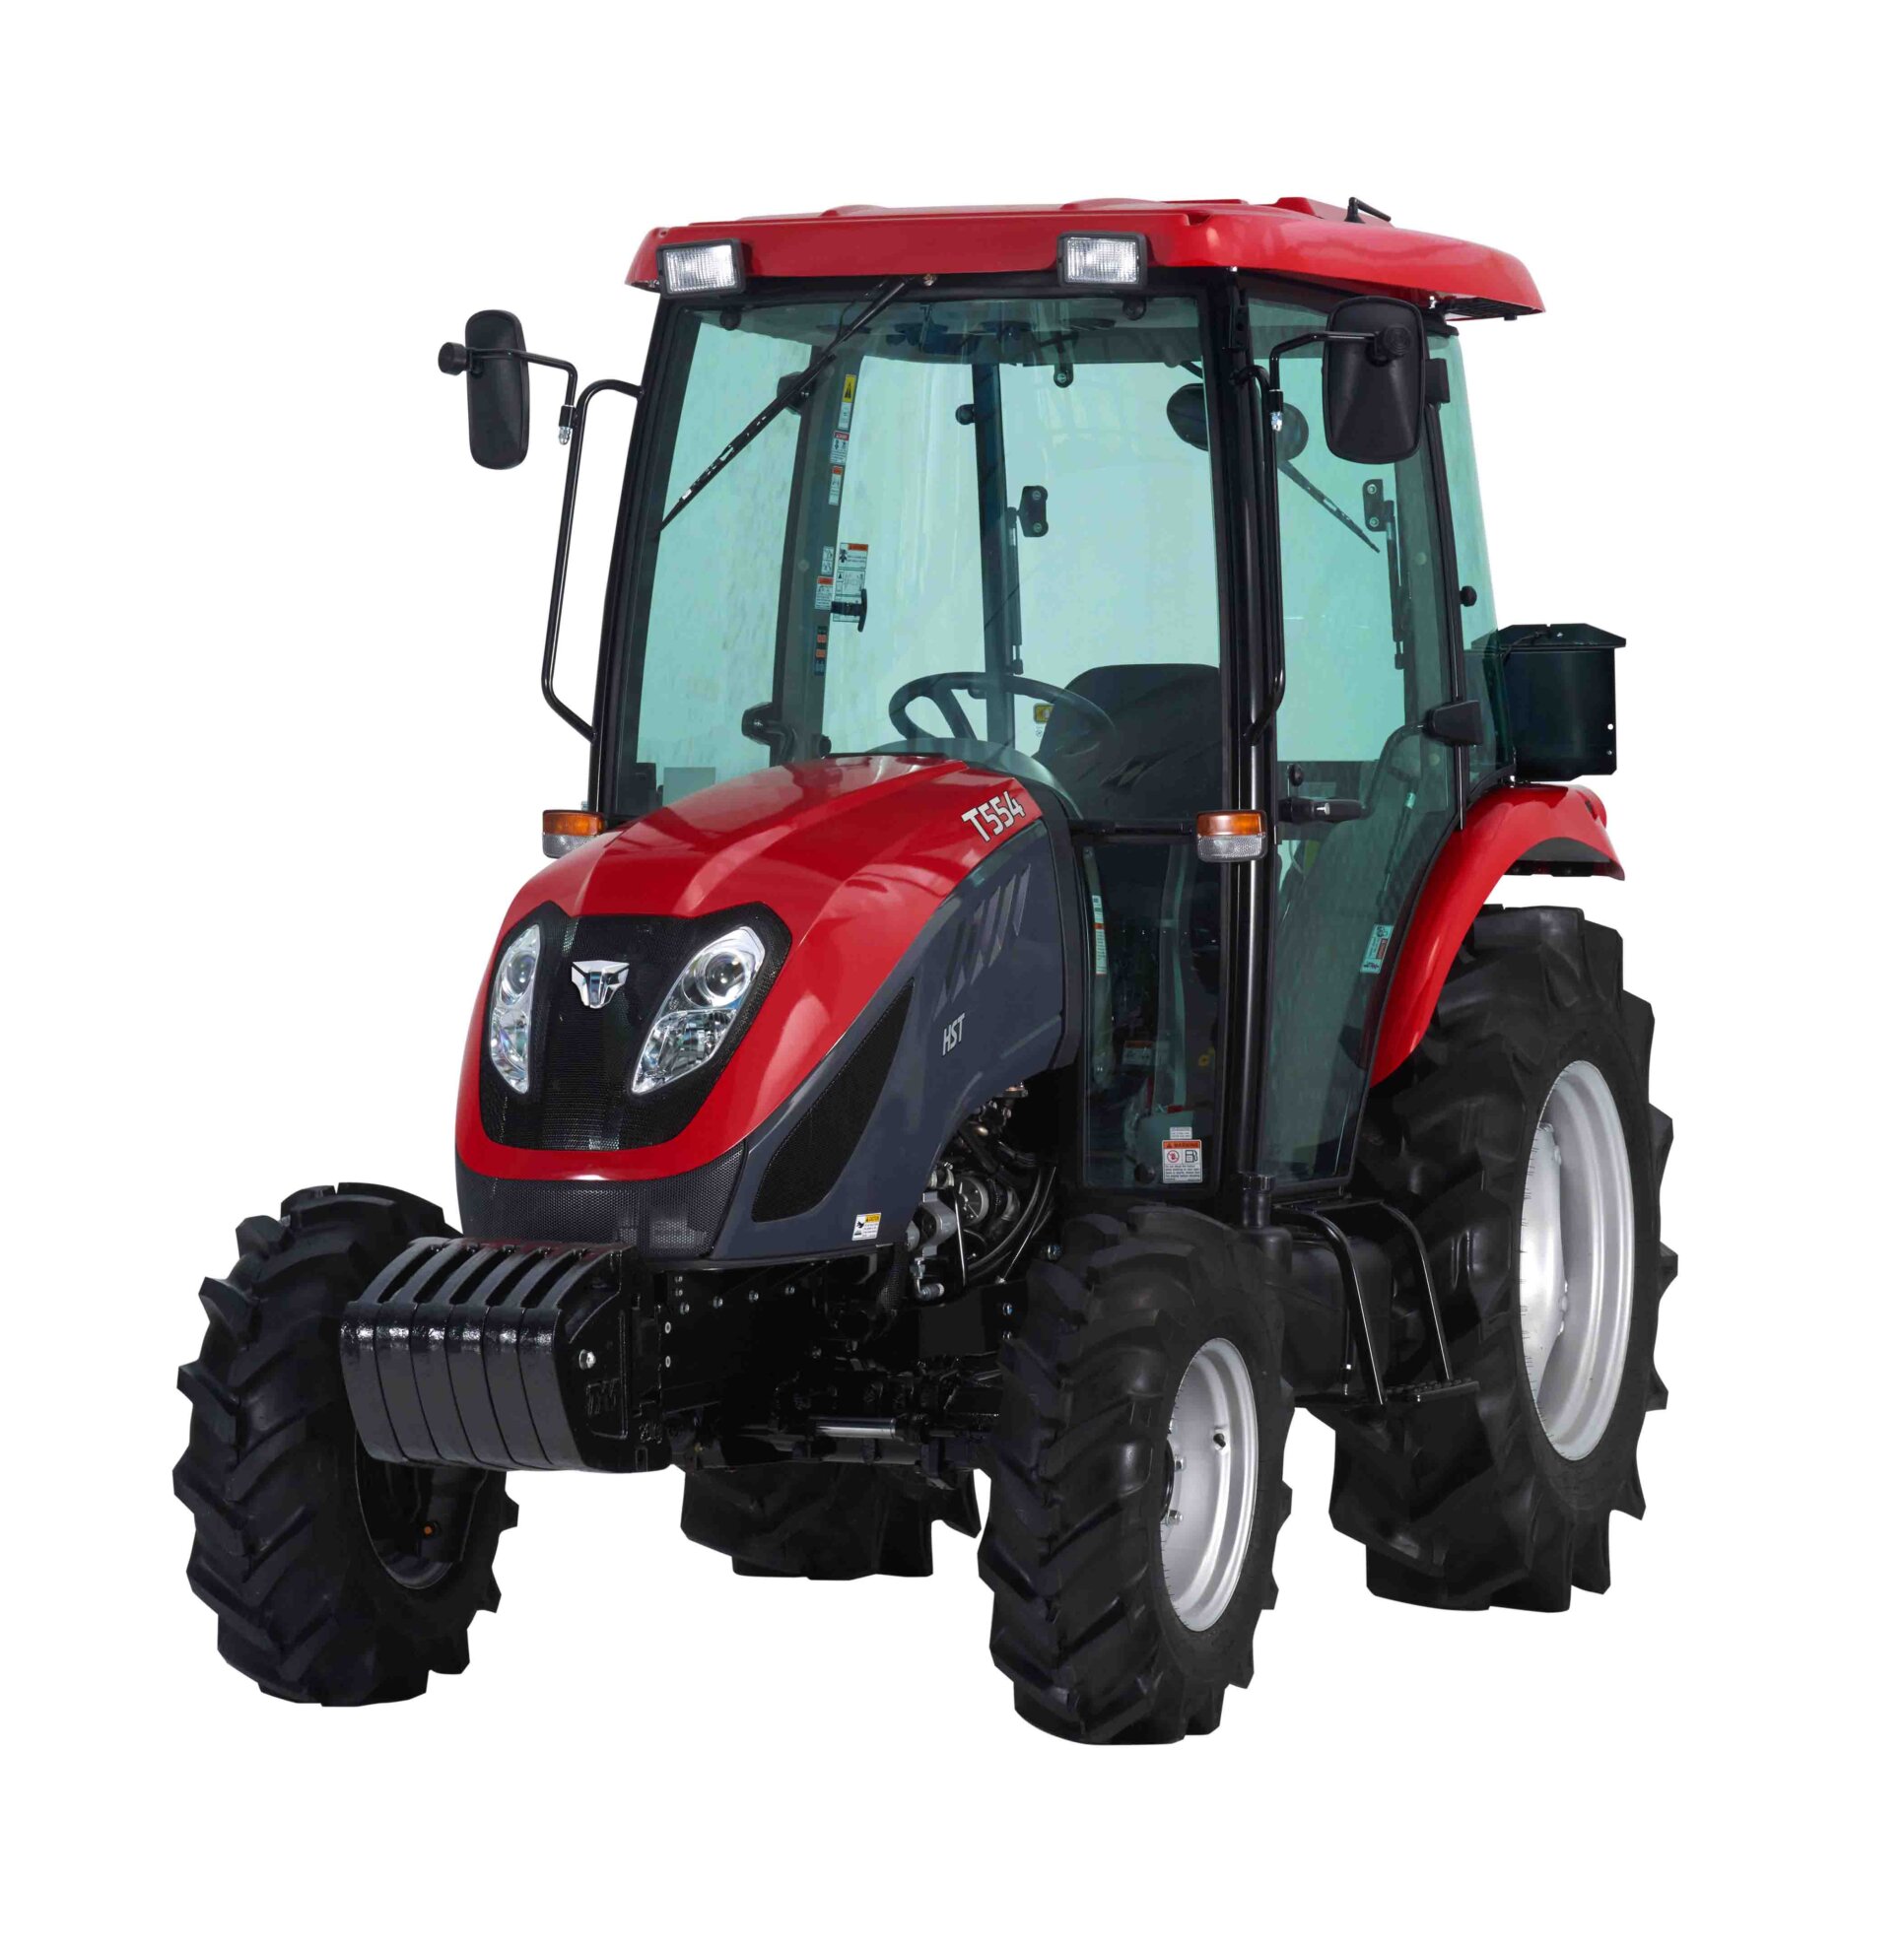 Tym/Branson compact tractor model T555 Cab (Hydr. drive)